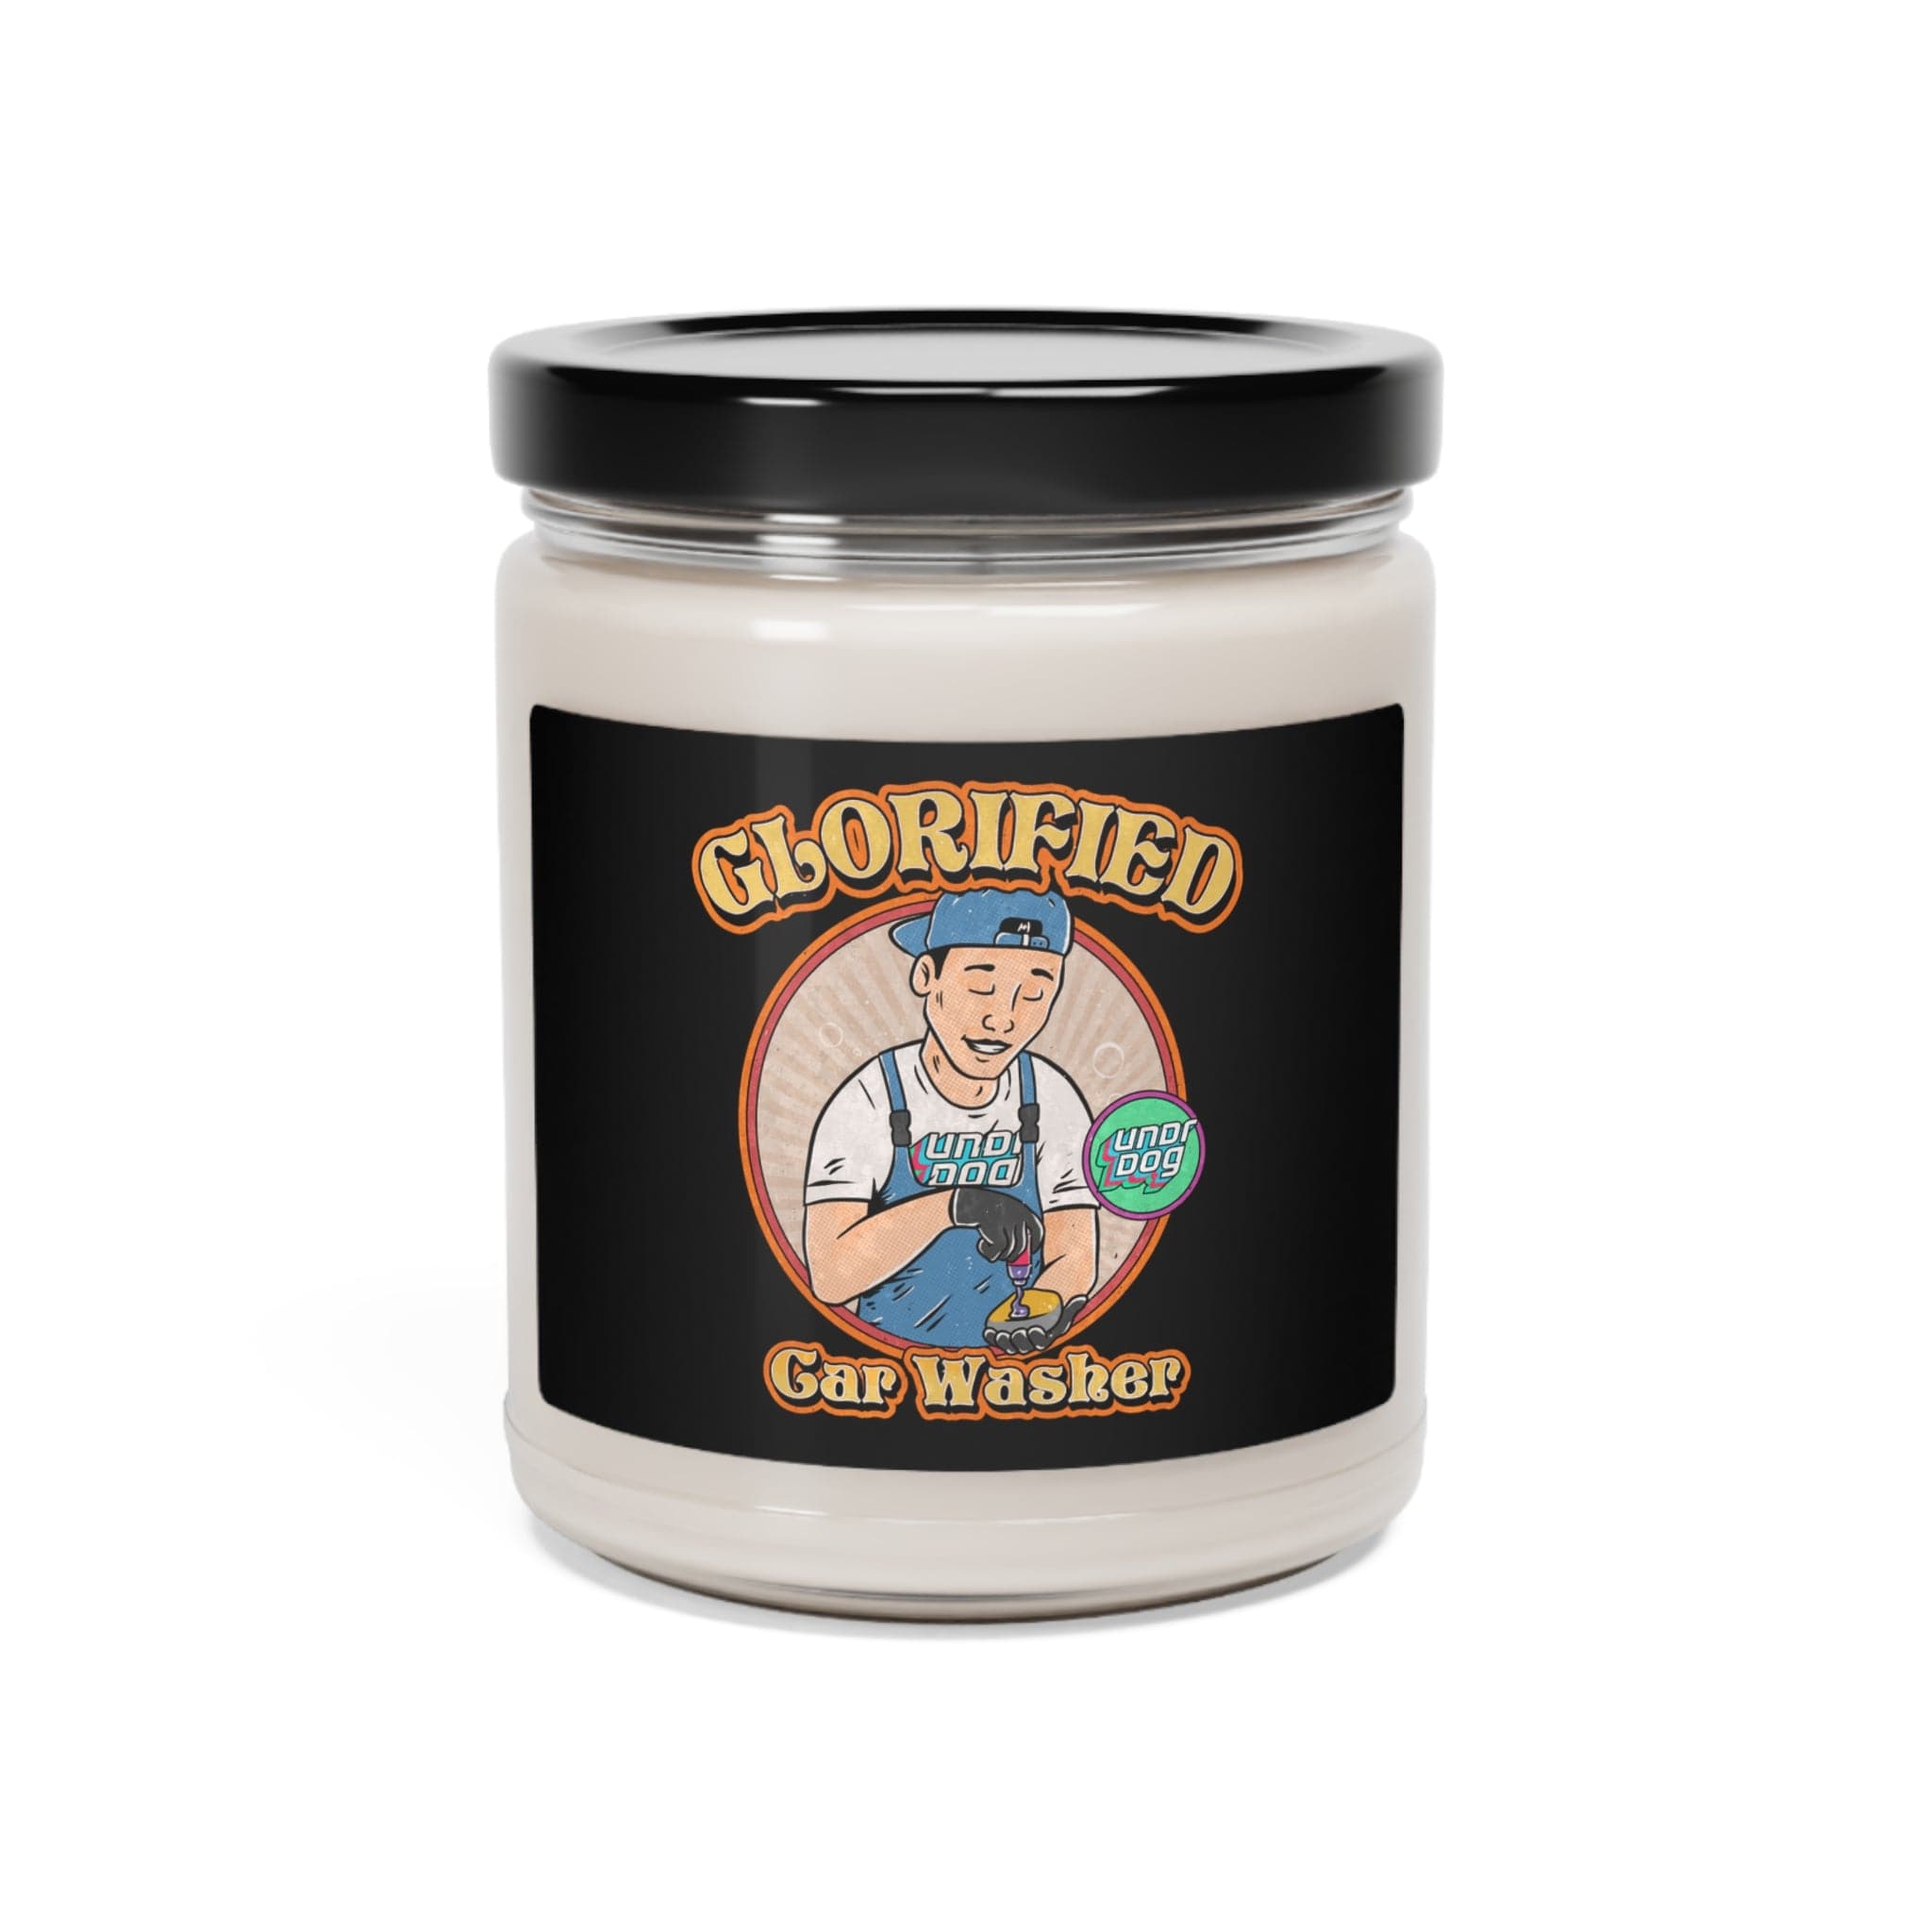 4378120848525982054_2048.jpg - Glorified Car Washer Scented Candle, 9oz - Undrdog Surface Products